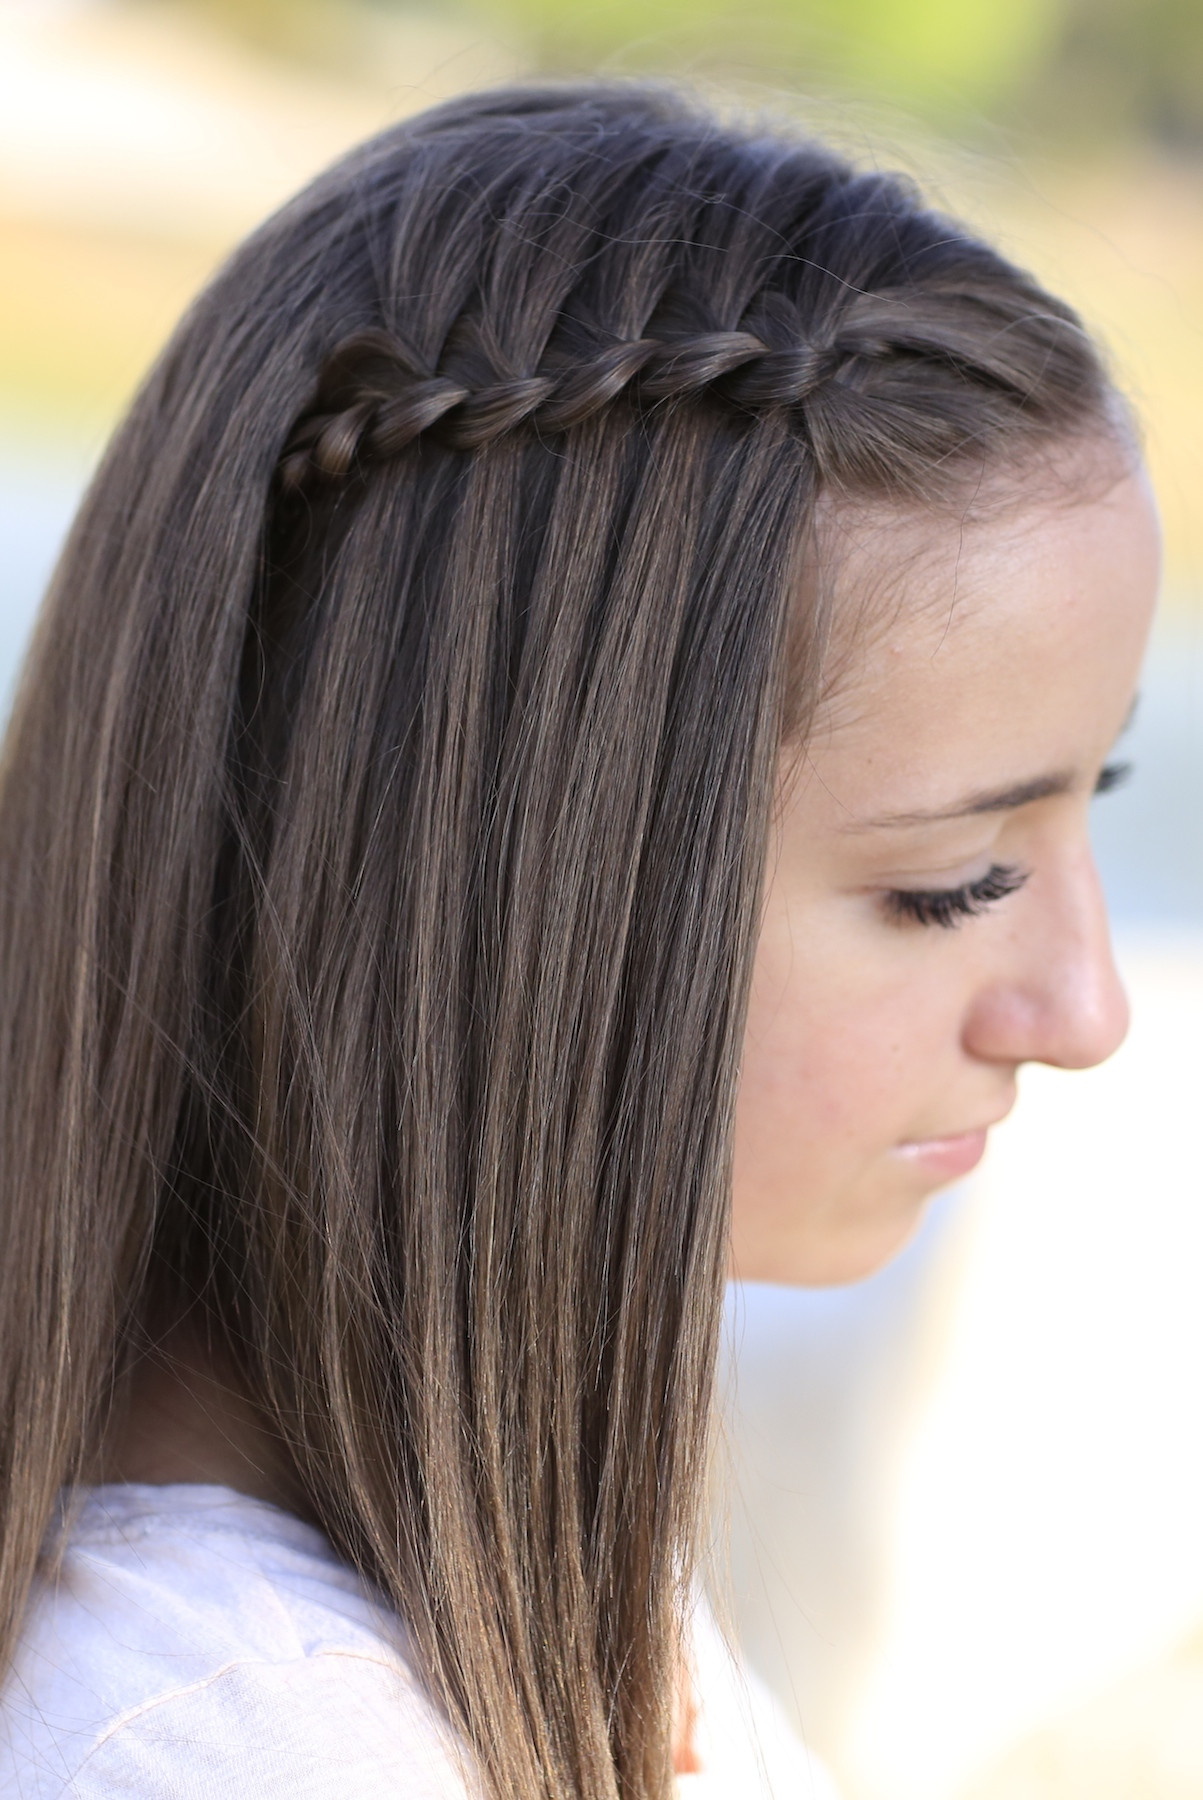 Hairstyles For 10 Yr Old Girls
 TOP 10 hairstyles for 12 year old girls